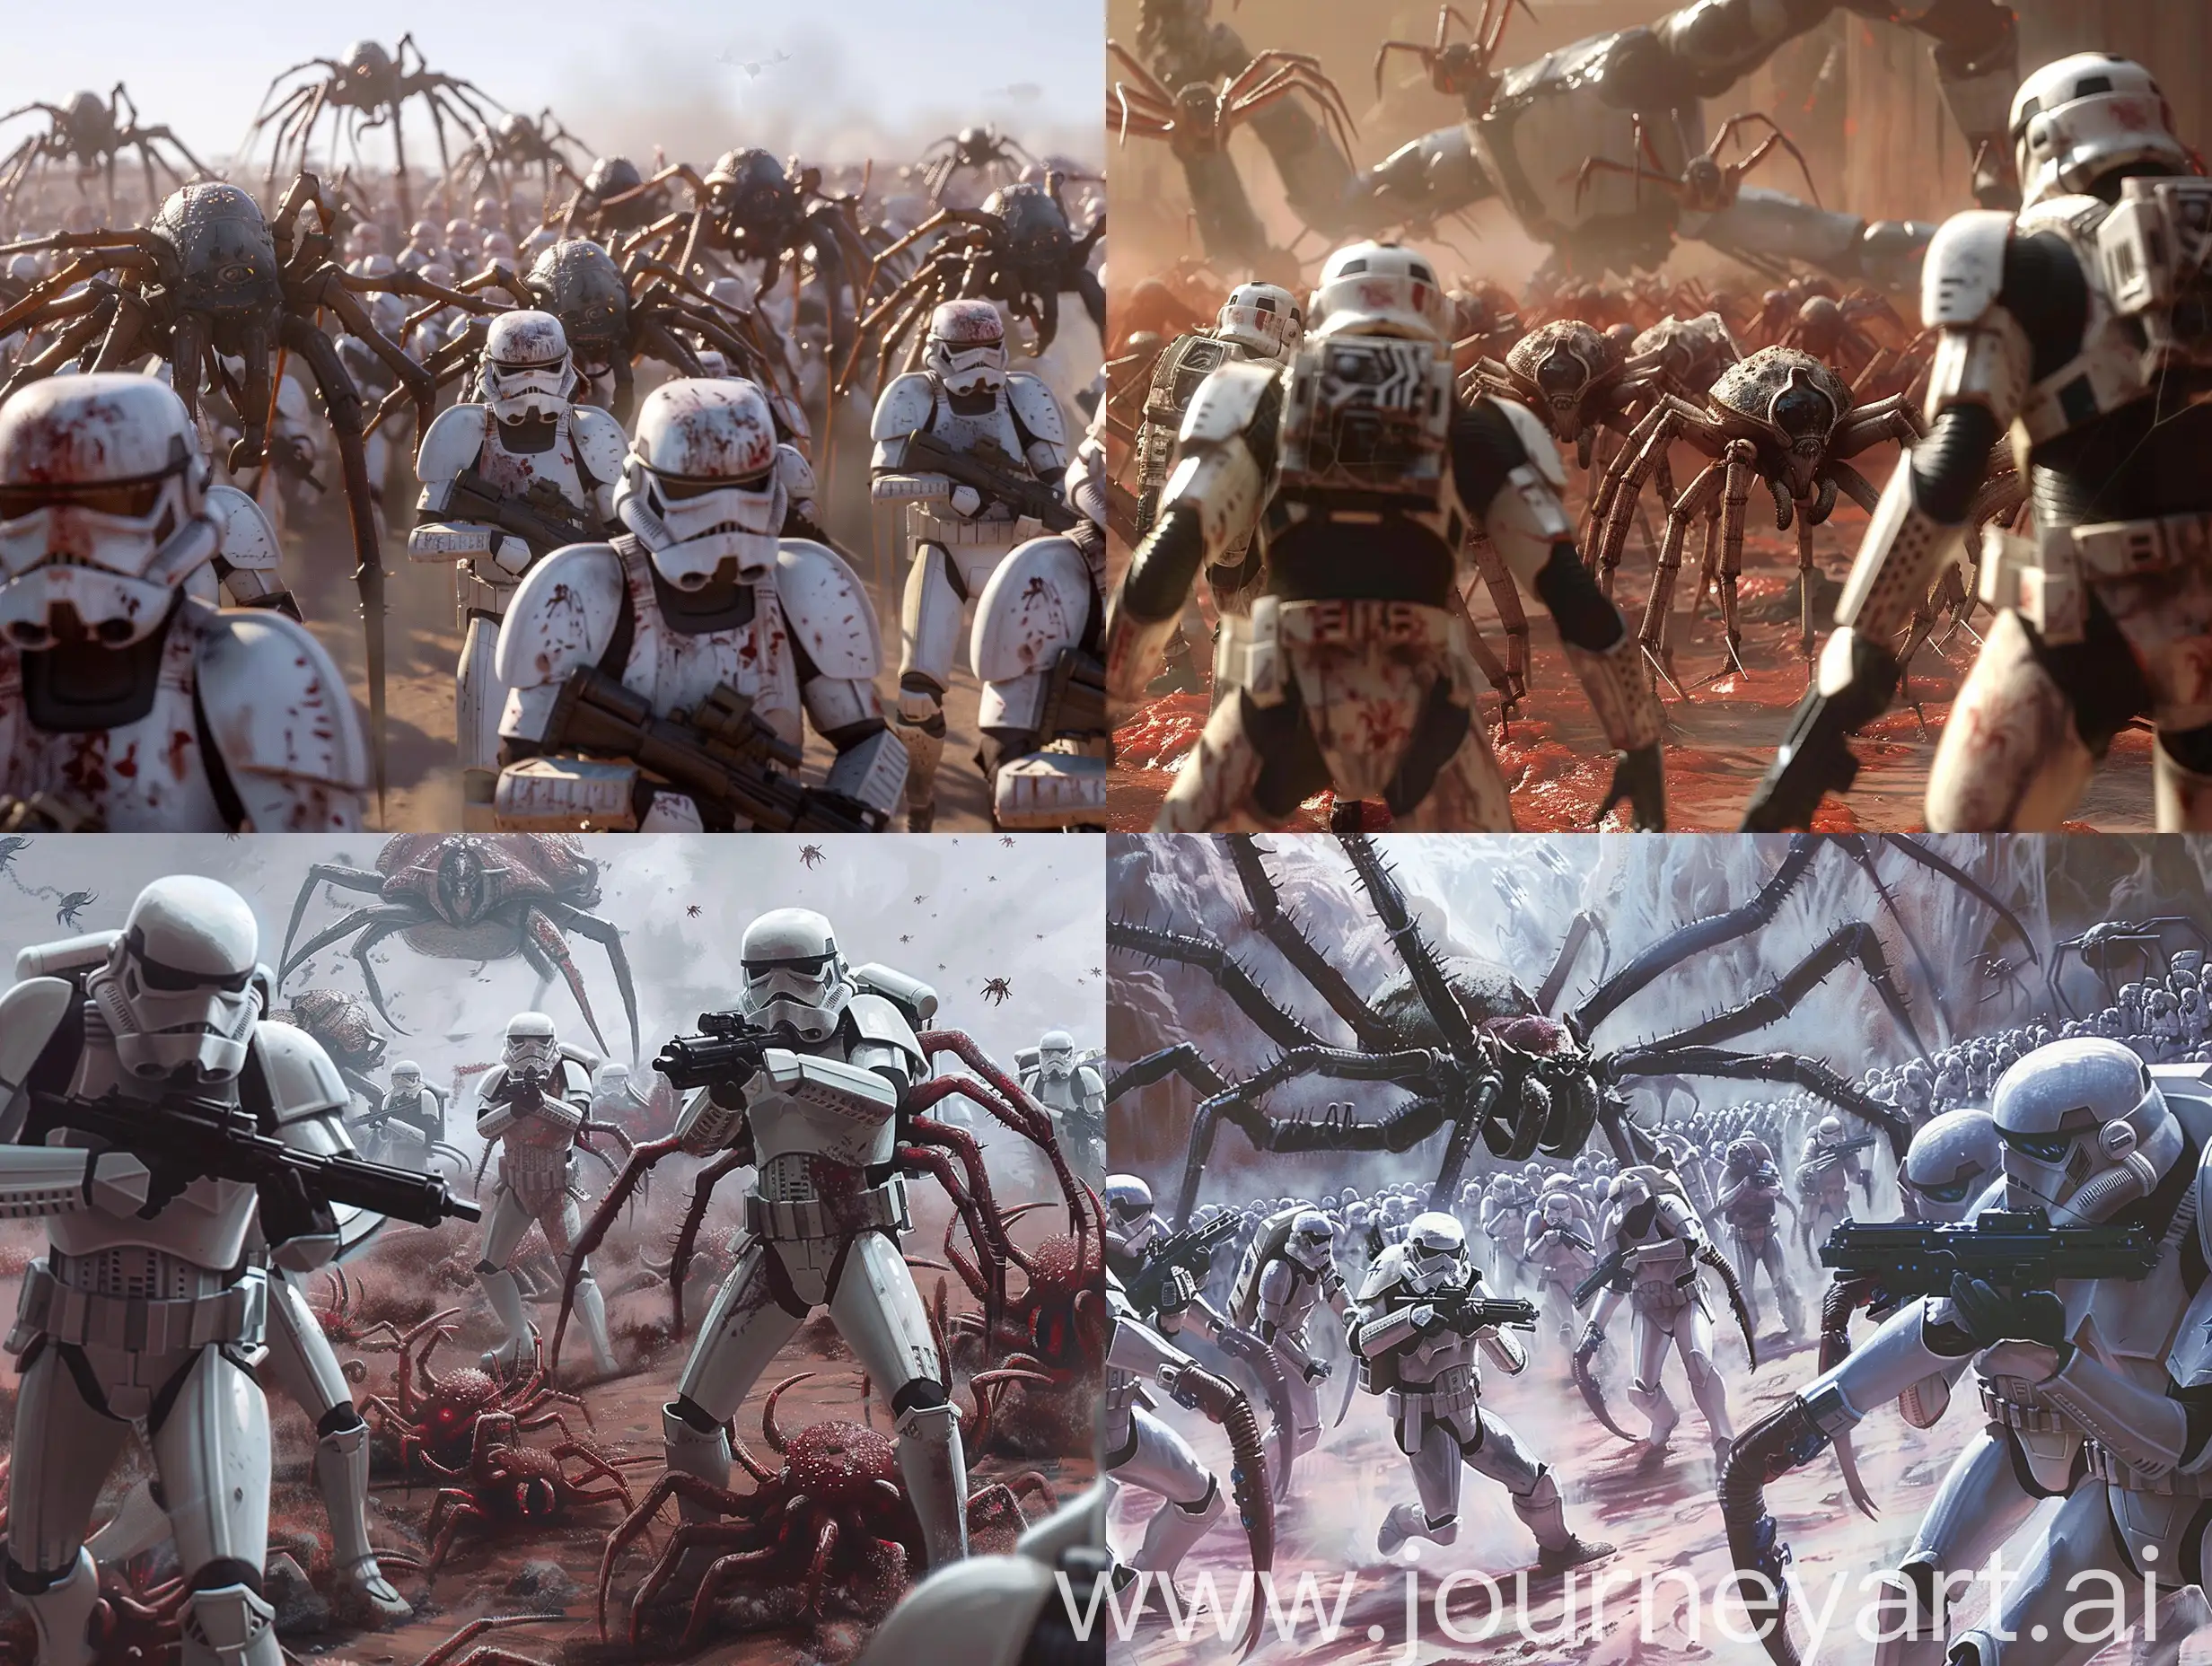 Epic-Battle-Arachnoid-Horde-Confronts-Star-Troopers-on-the-Battlefield